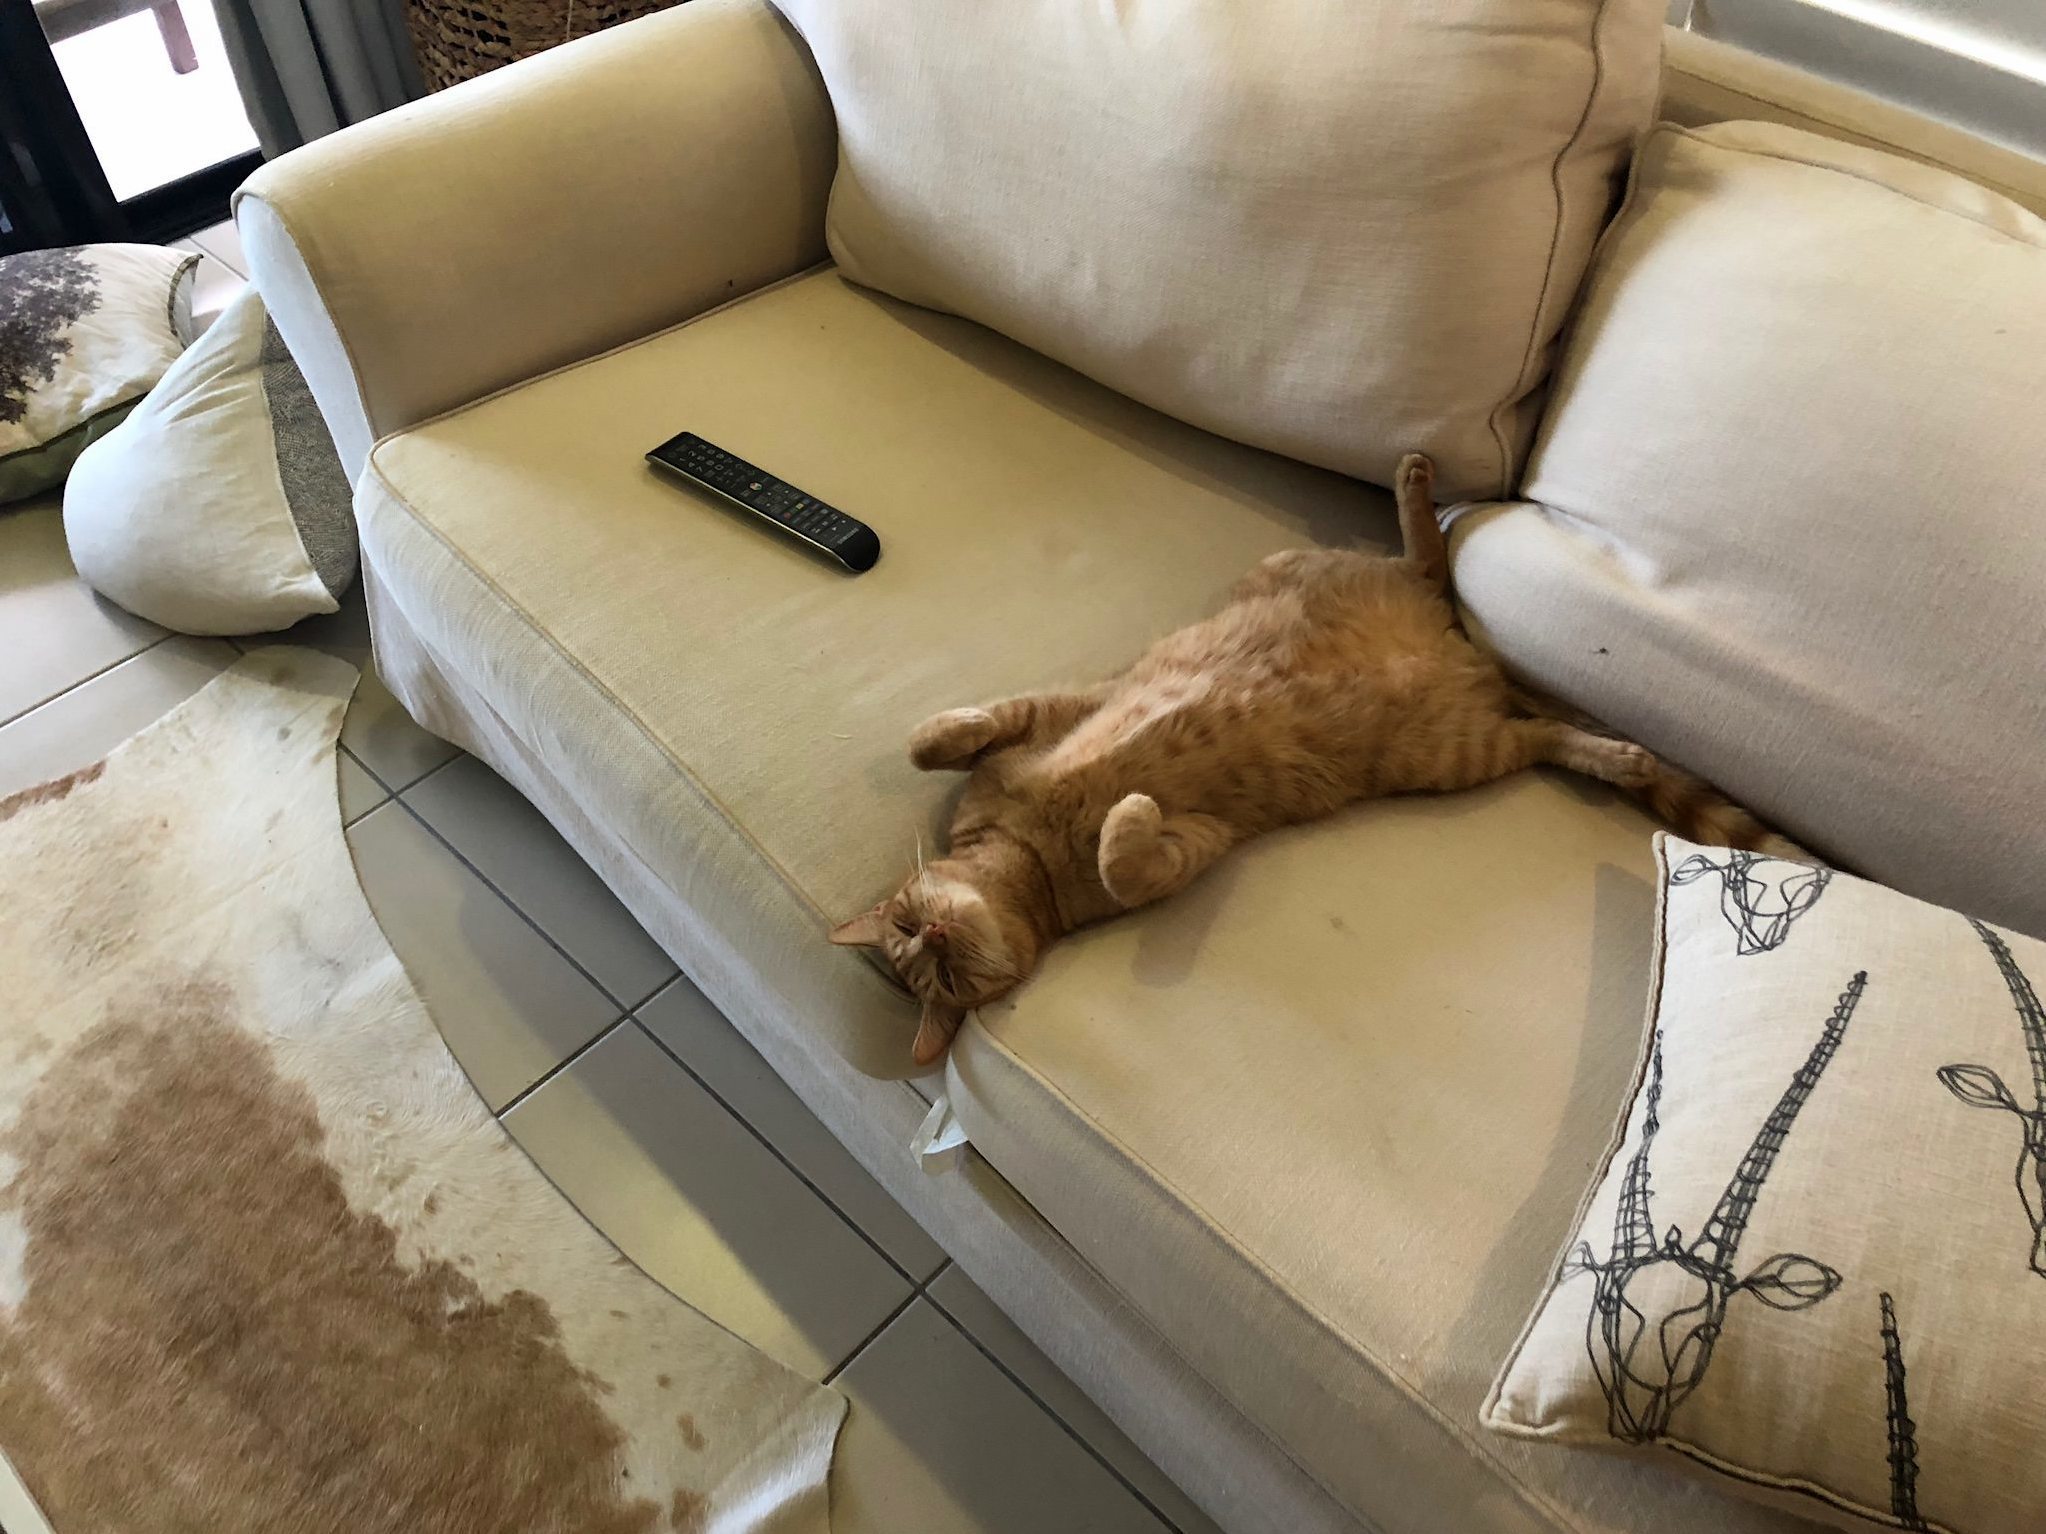 Its hot, this is how he gets comfortable.